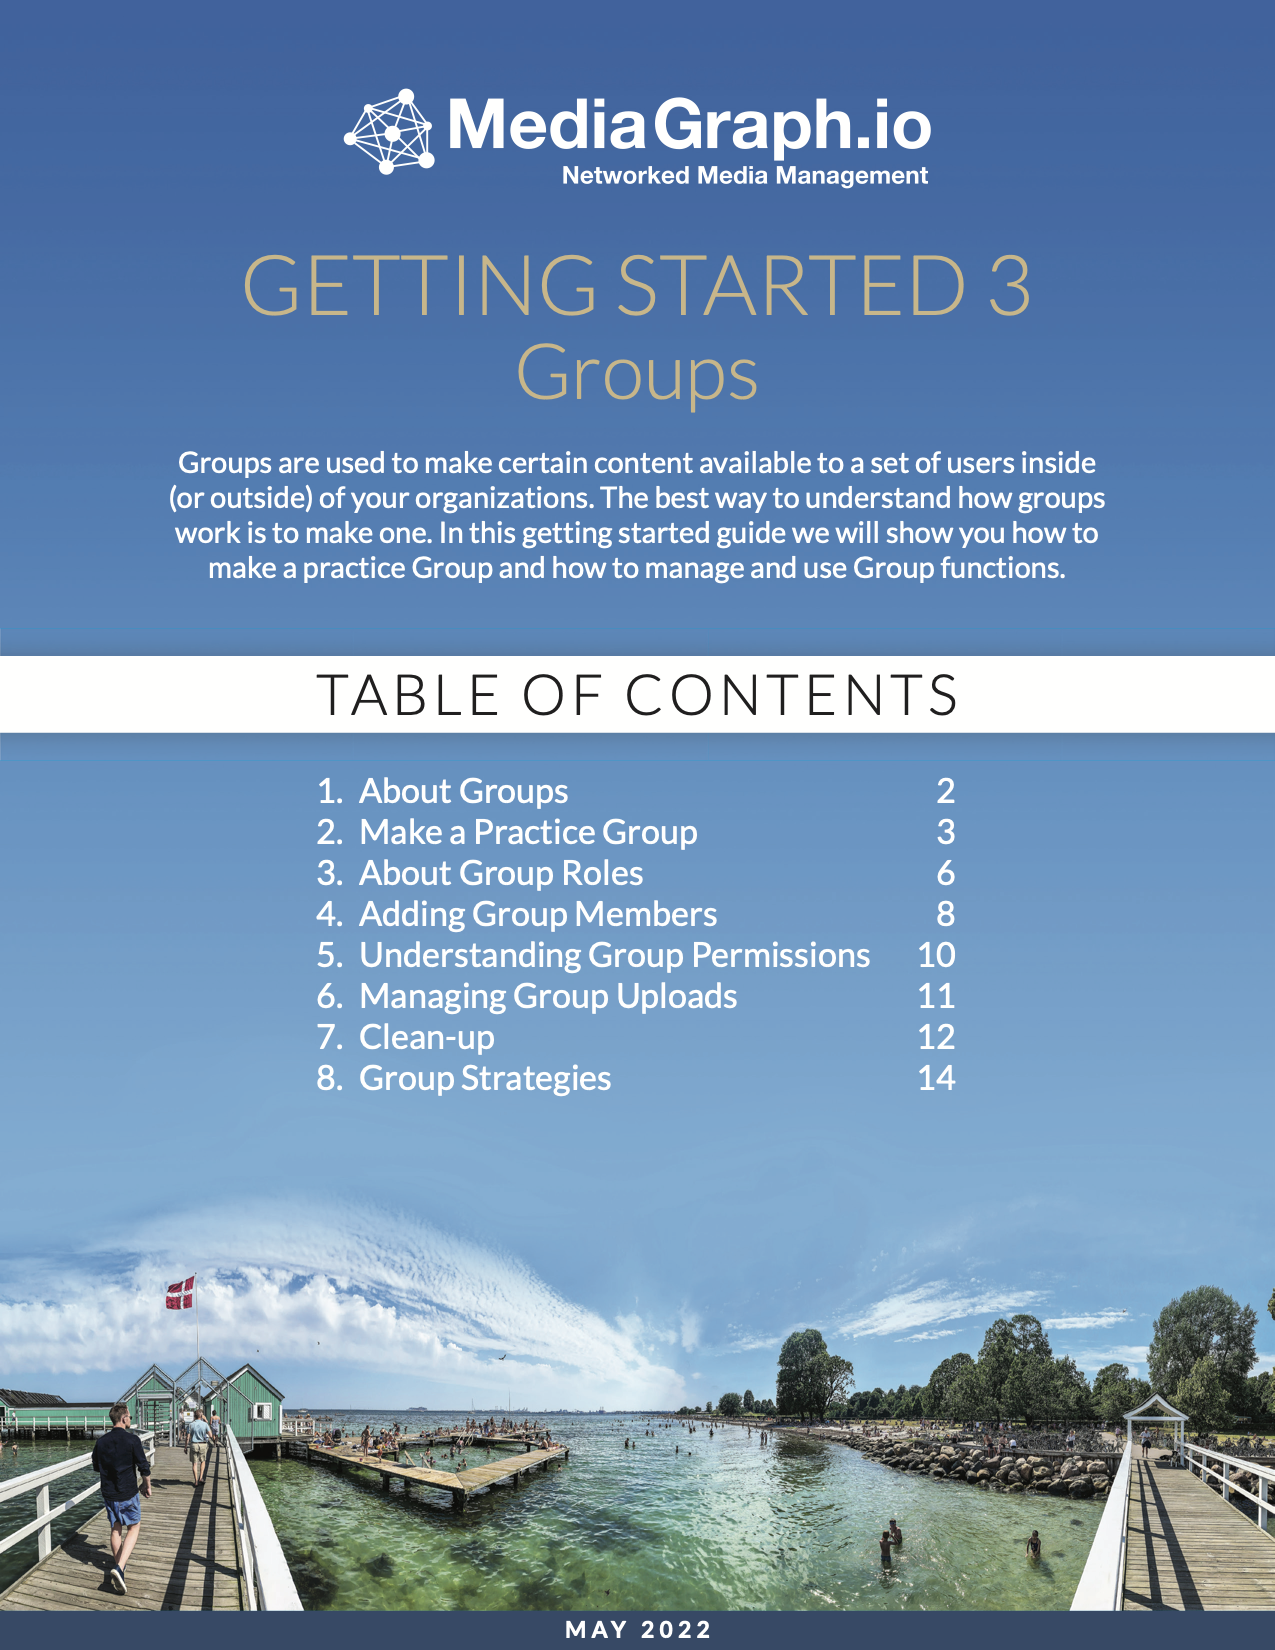 MediaGraph_Getting_Started_-_Groups_1-1_copy.png